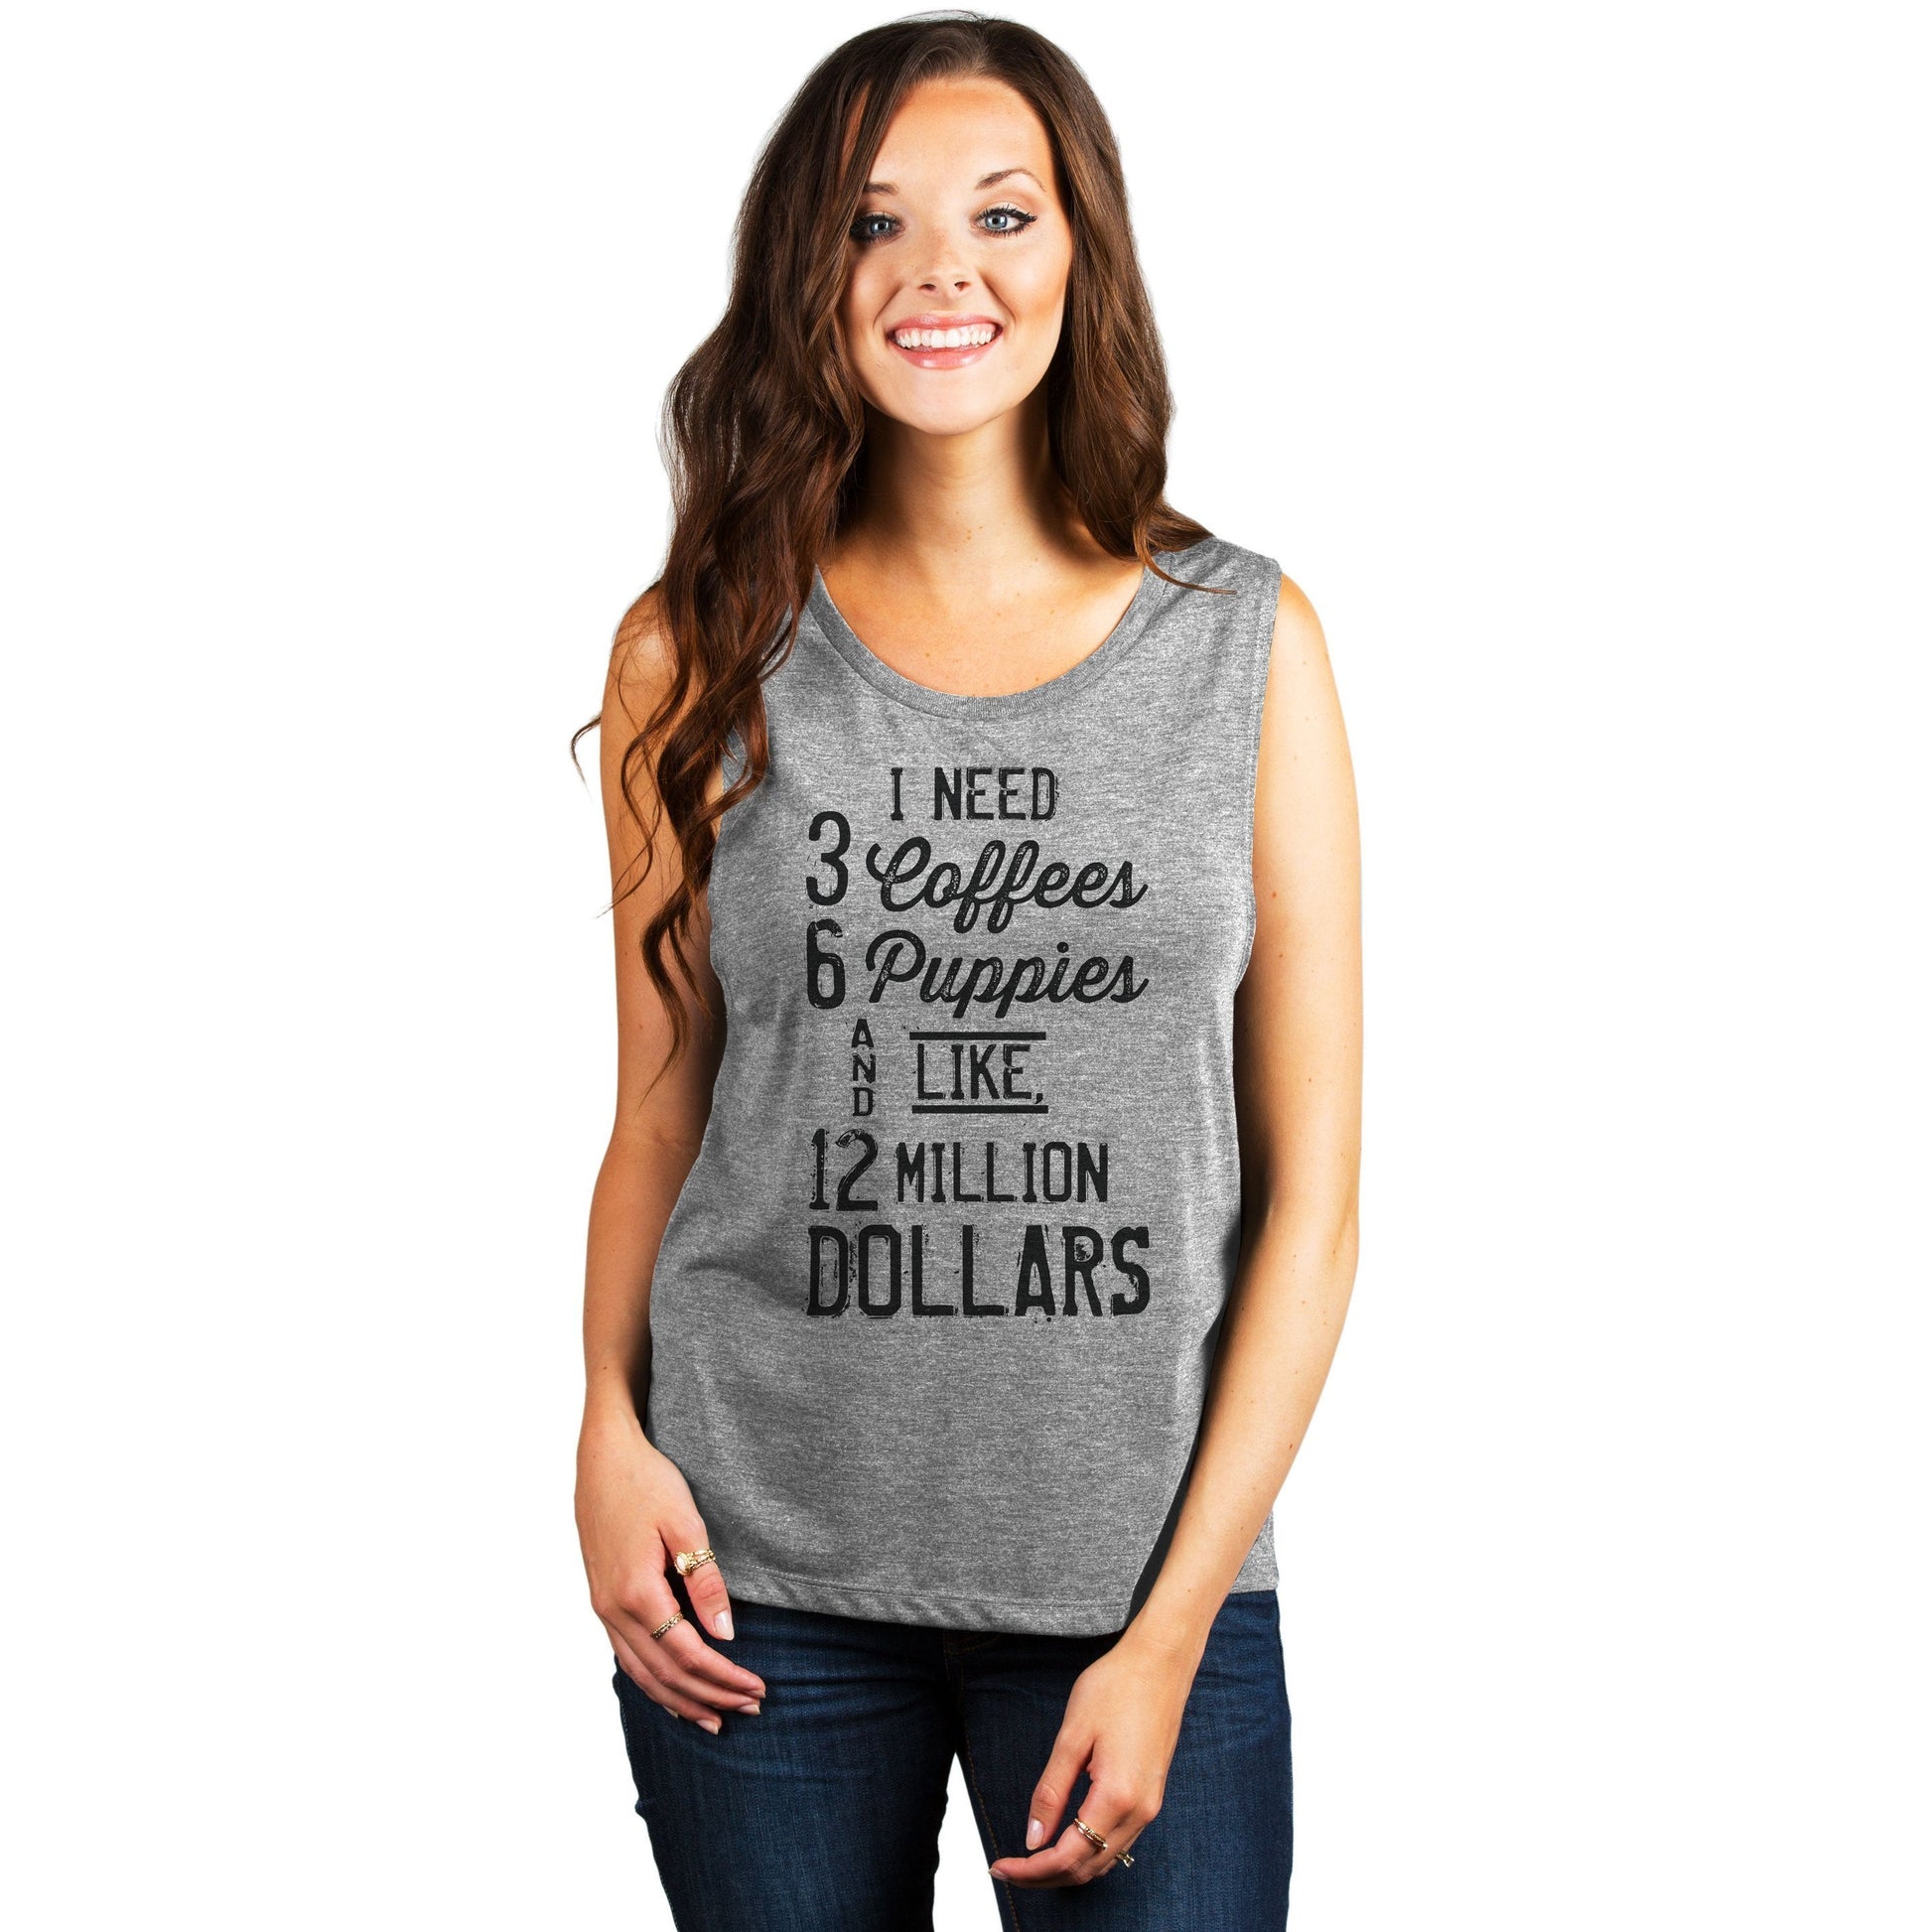 3 Coffees 6 Puppies Million Dollars Women's Relaxed Muscle Tank Tee Heather Grey Model
